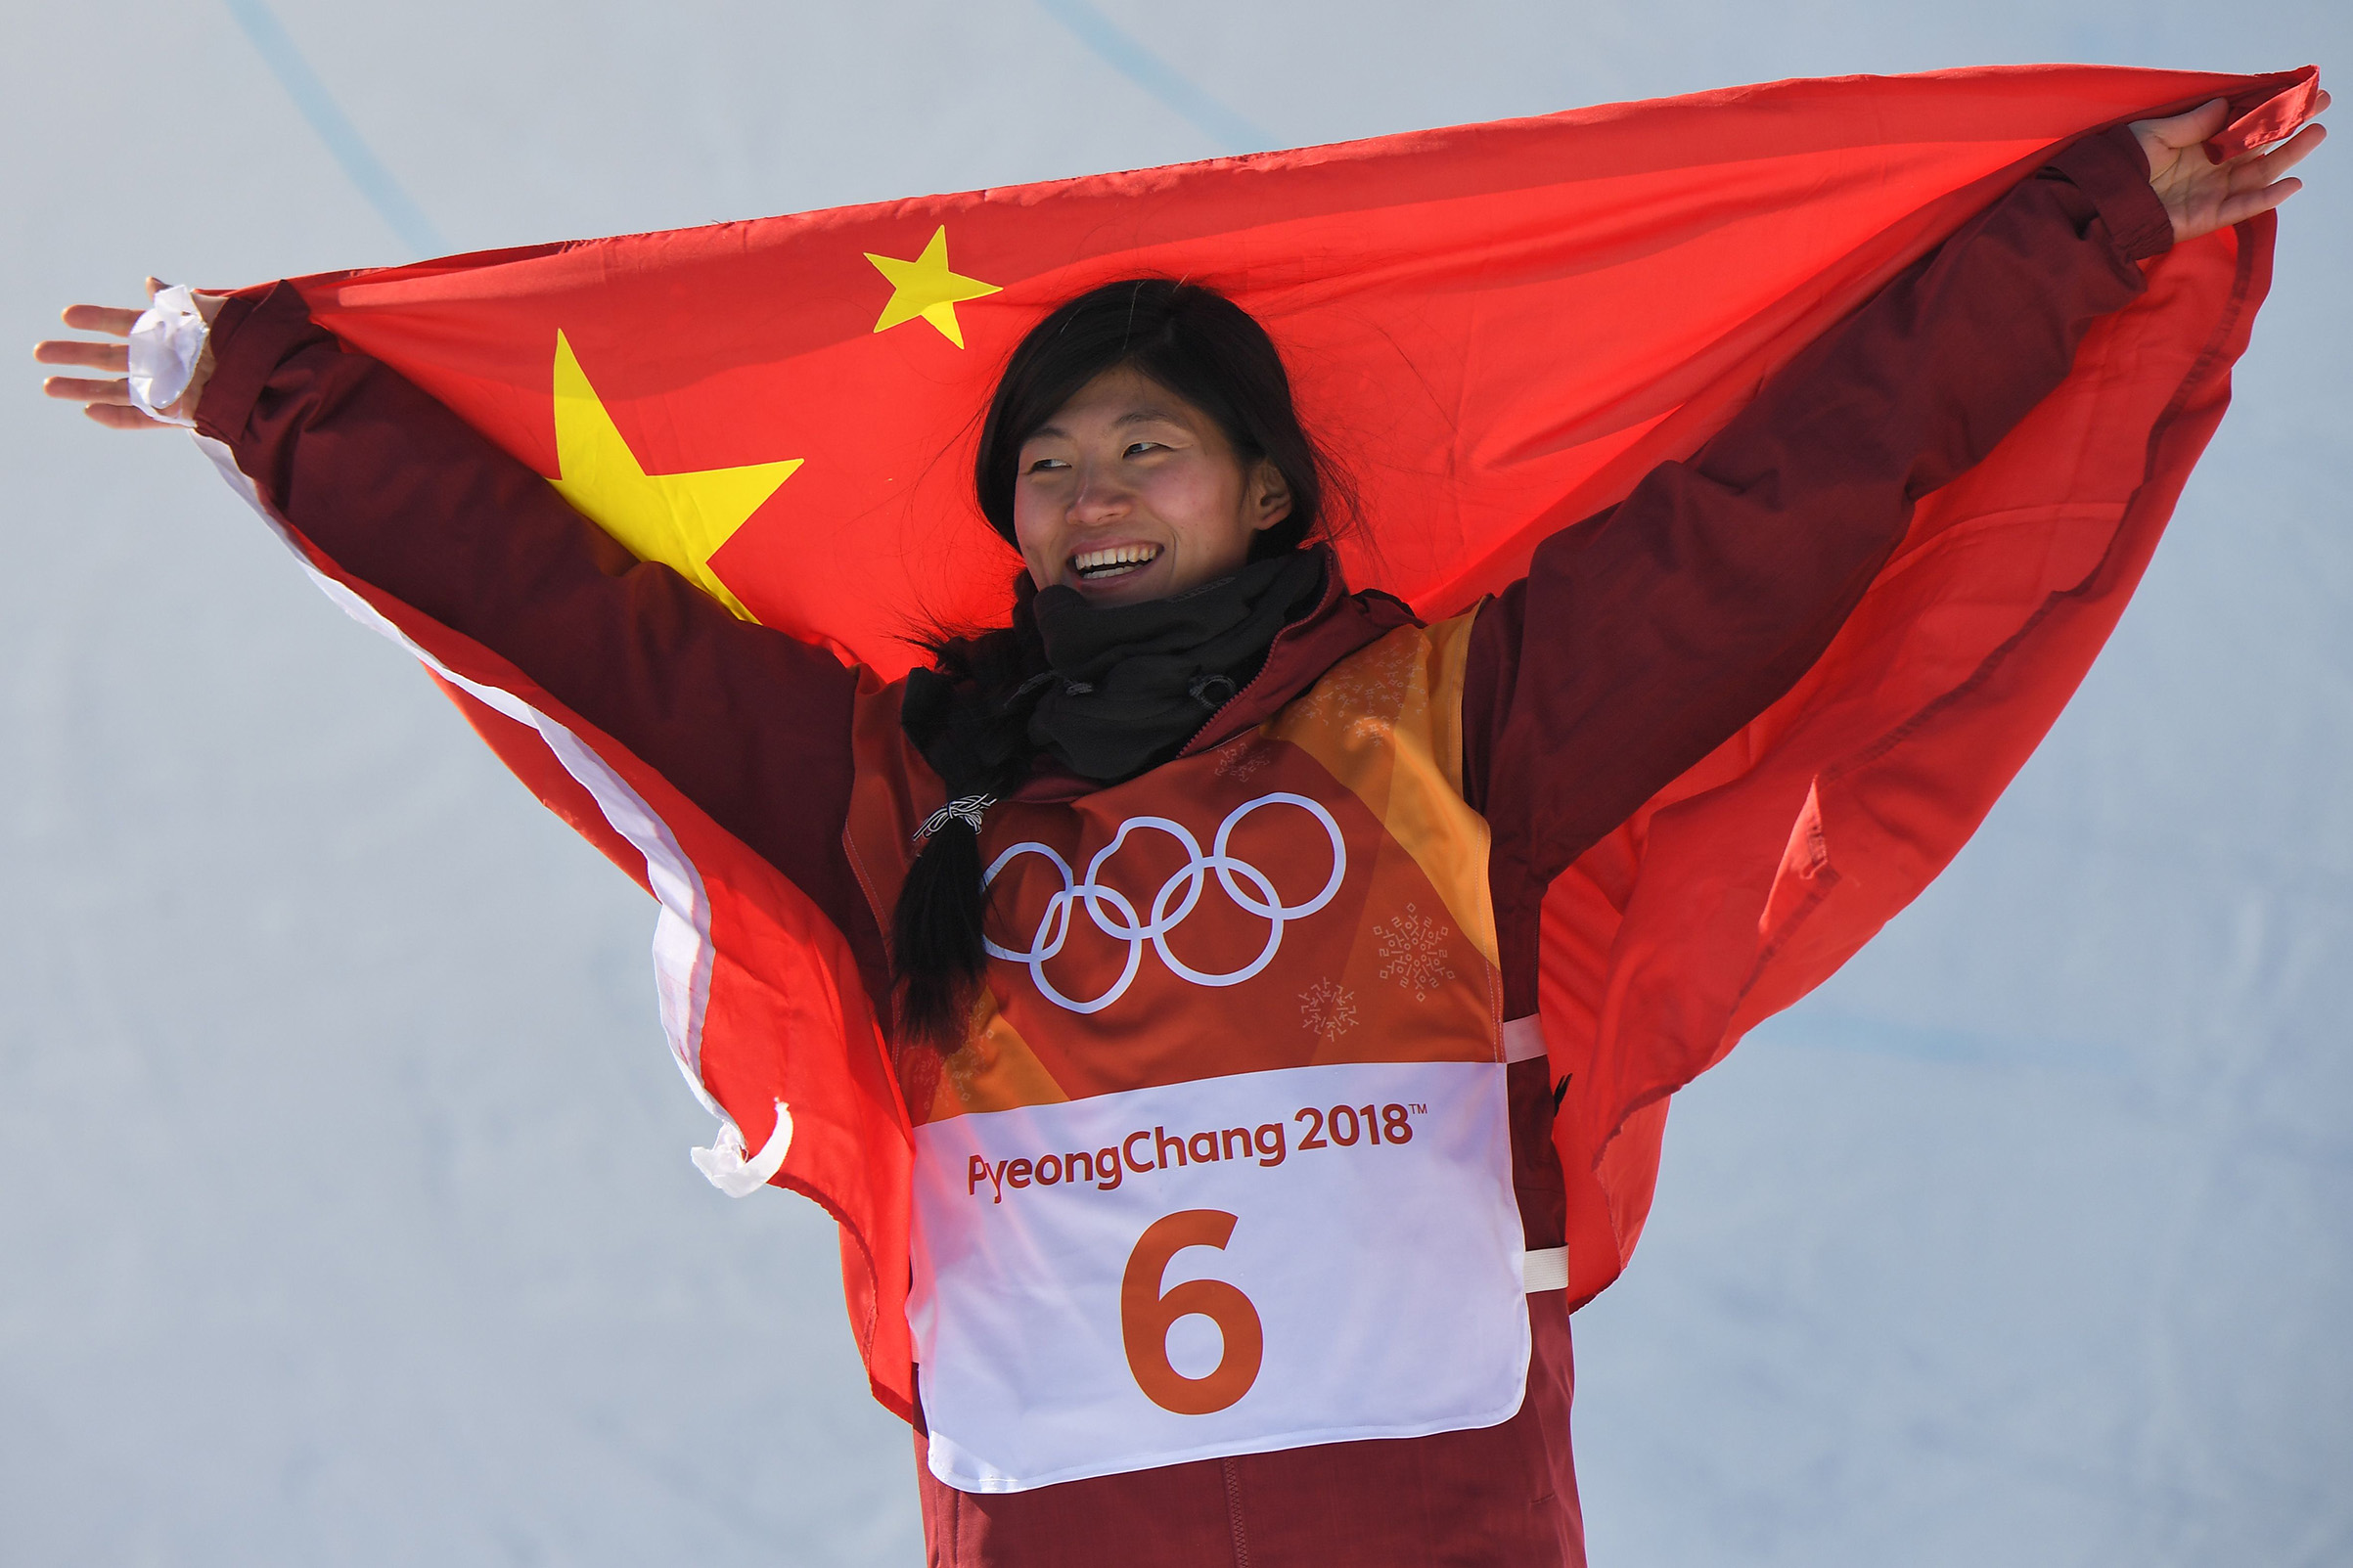 Silver medallist China's Liu Jiayu celebrates during the victory ceremony after the women's snowboard halfpipe final on Feb. 13, 2018. (Loic Venance—AFP/Getty Images:)